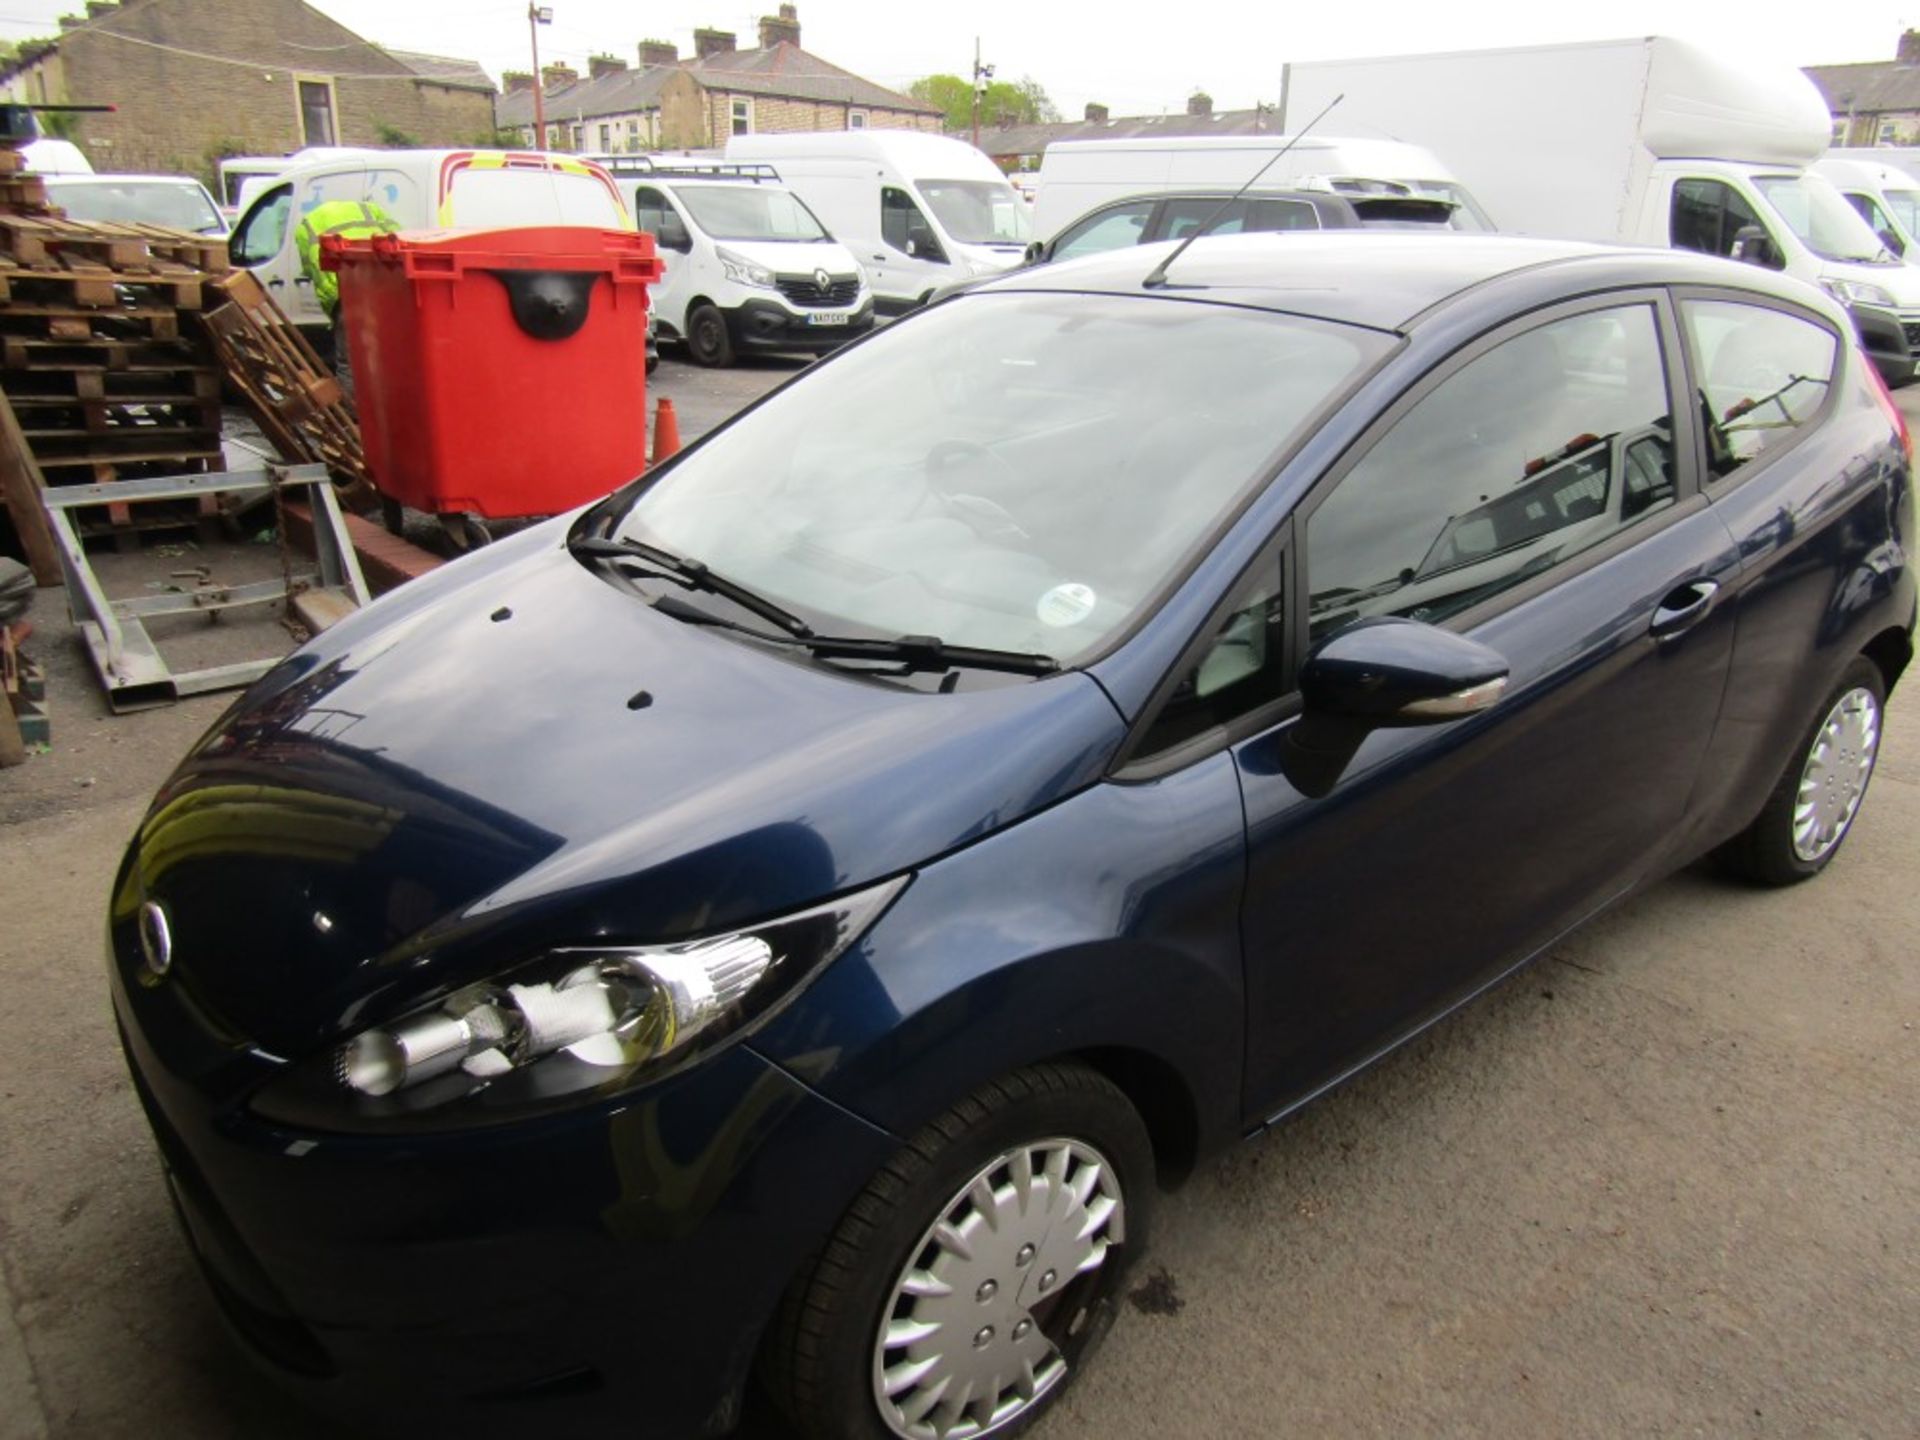 10 reg FORD FIESTA EDGE TDCI 68, 1ST REG 06/10, TEST 06/22, 116503M WARRANTED, V5 HERE, 1 OWNER FROM - Image 2 of 6